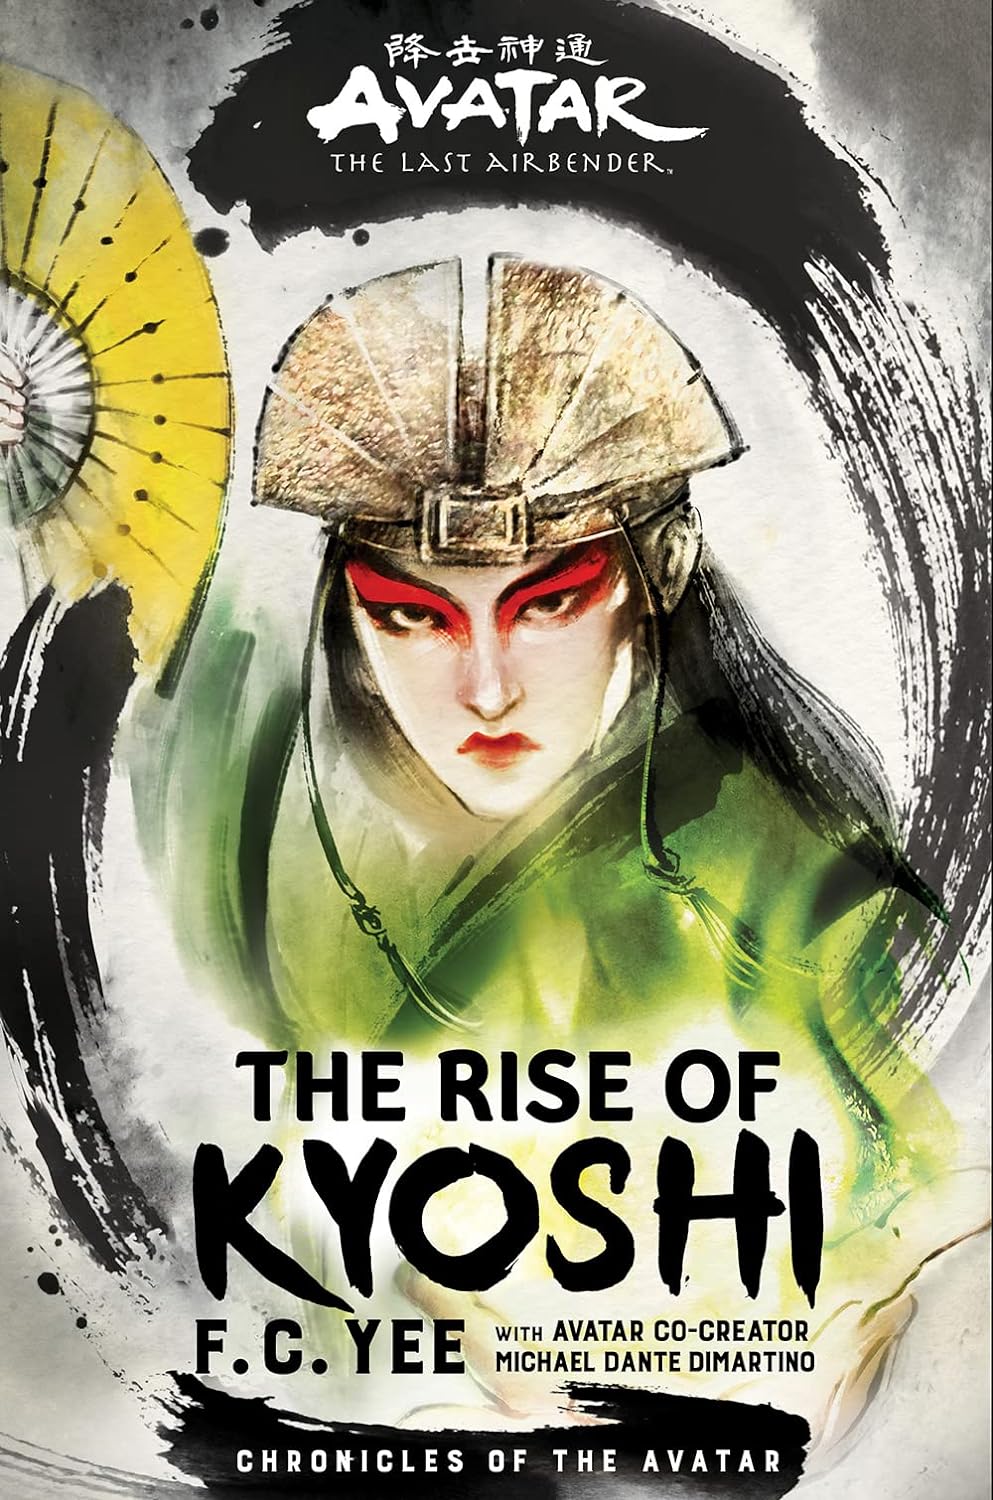 Avatar, The Last Airbender: The Rise of Kyoshi (Book 1)